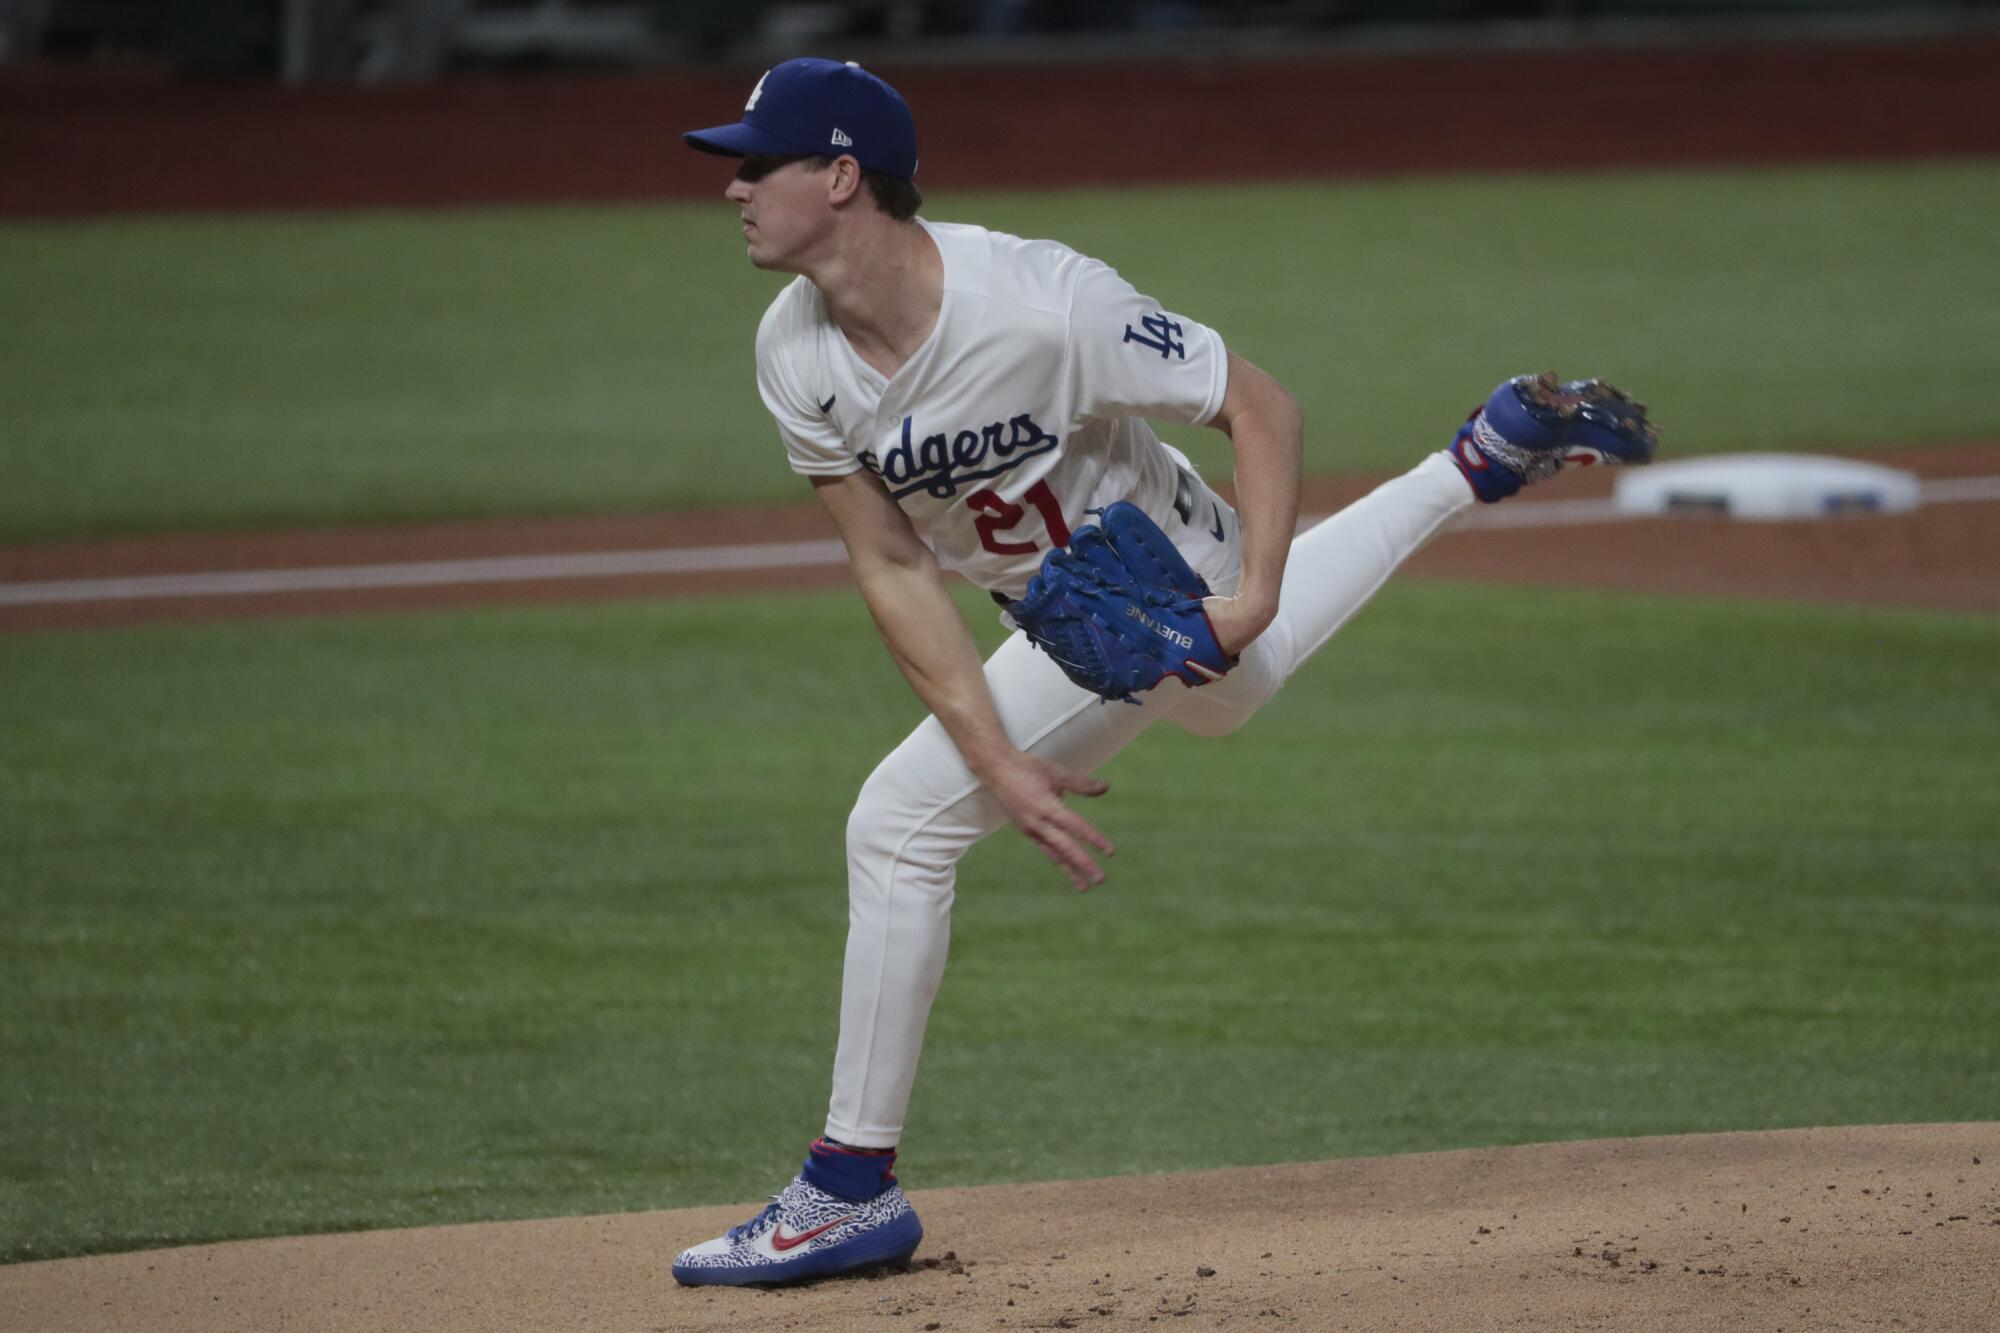 Dodgers starting pitcher Walker Buehler delivers in the first inning against the Atlanta Braves in Game 1 of the NLCS.